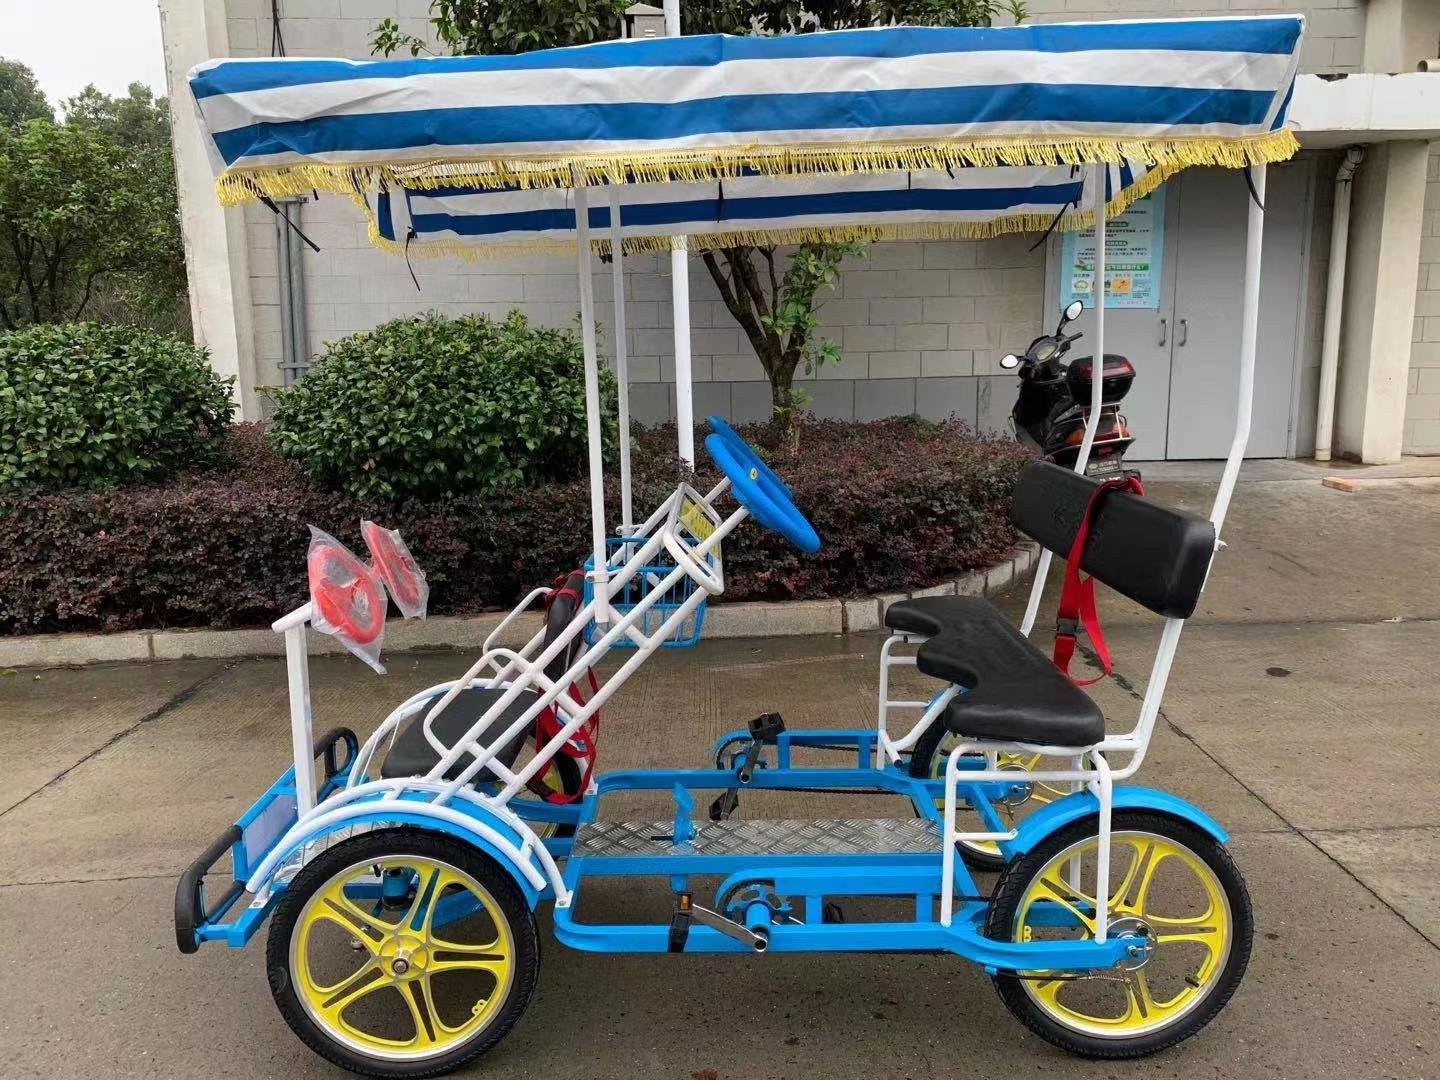 Hot Selling 2 Person and 4 Person Quad Surrey Bike Tandem Bike Four Seat Bicycle 2